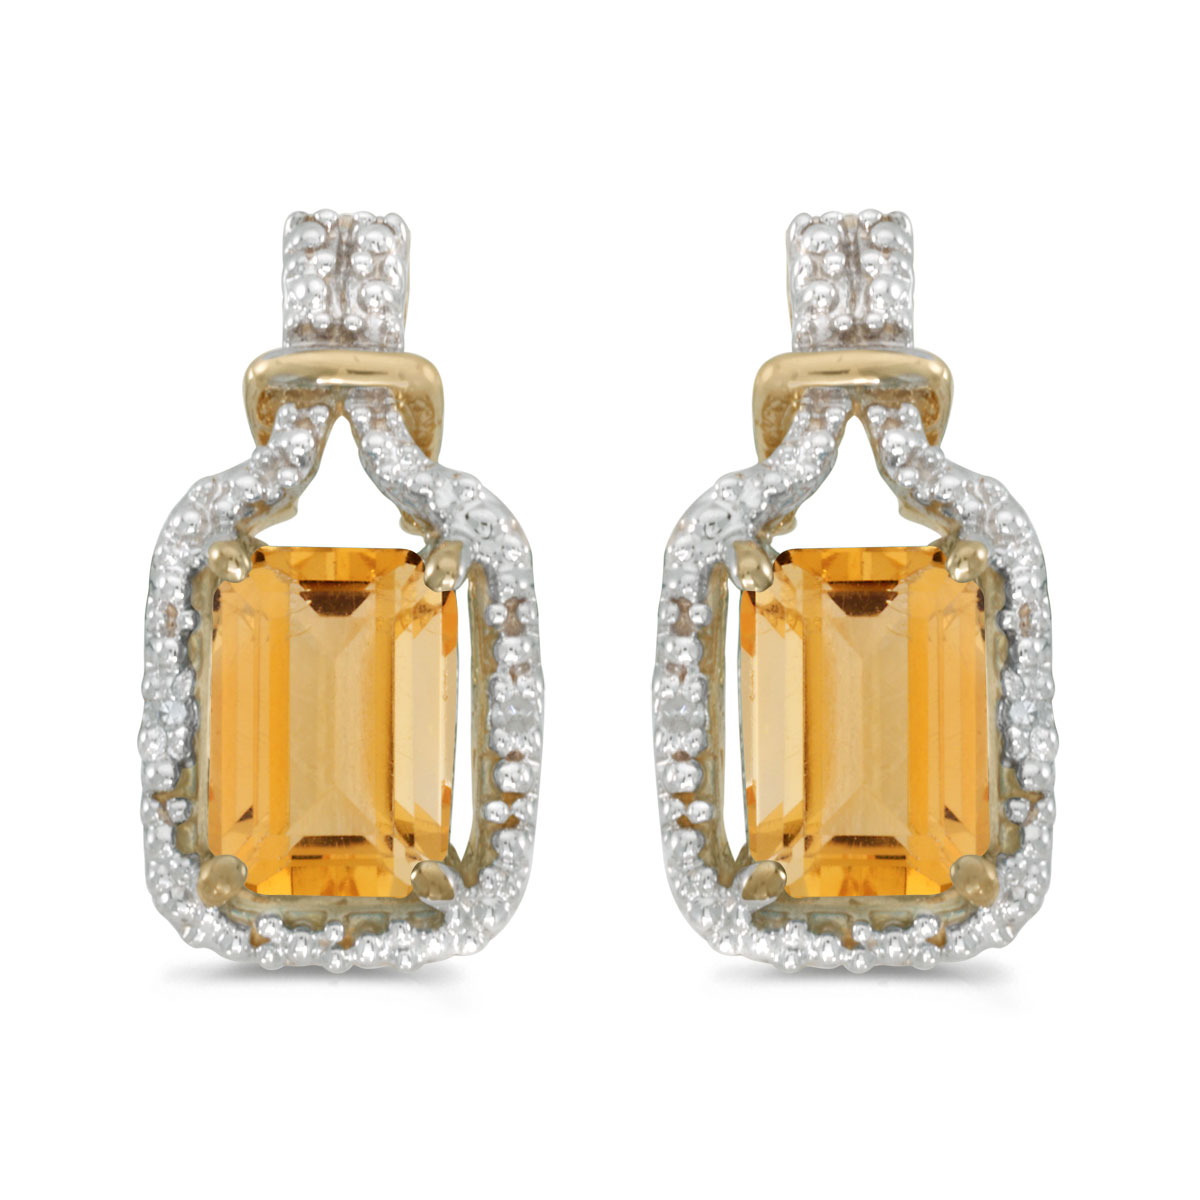 JCX2041: These 14k yellow gold emerald-cut citrine and diamond earrings feature 7x5 mm genuine natural citrines with a 1.58 ct total weight and sparkling diamond accents.